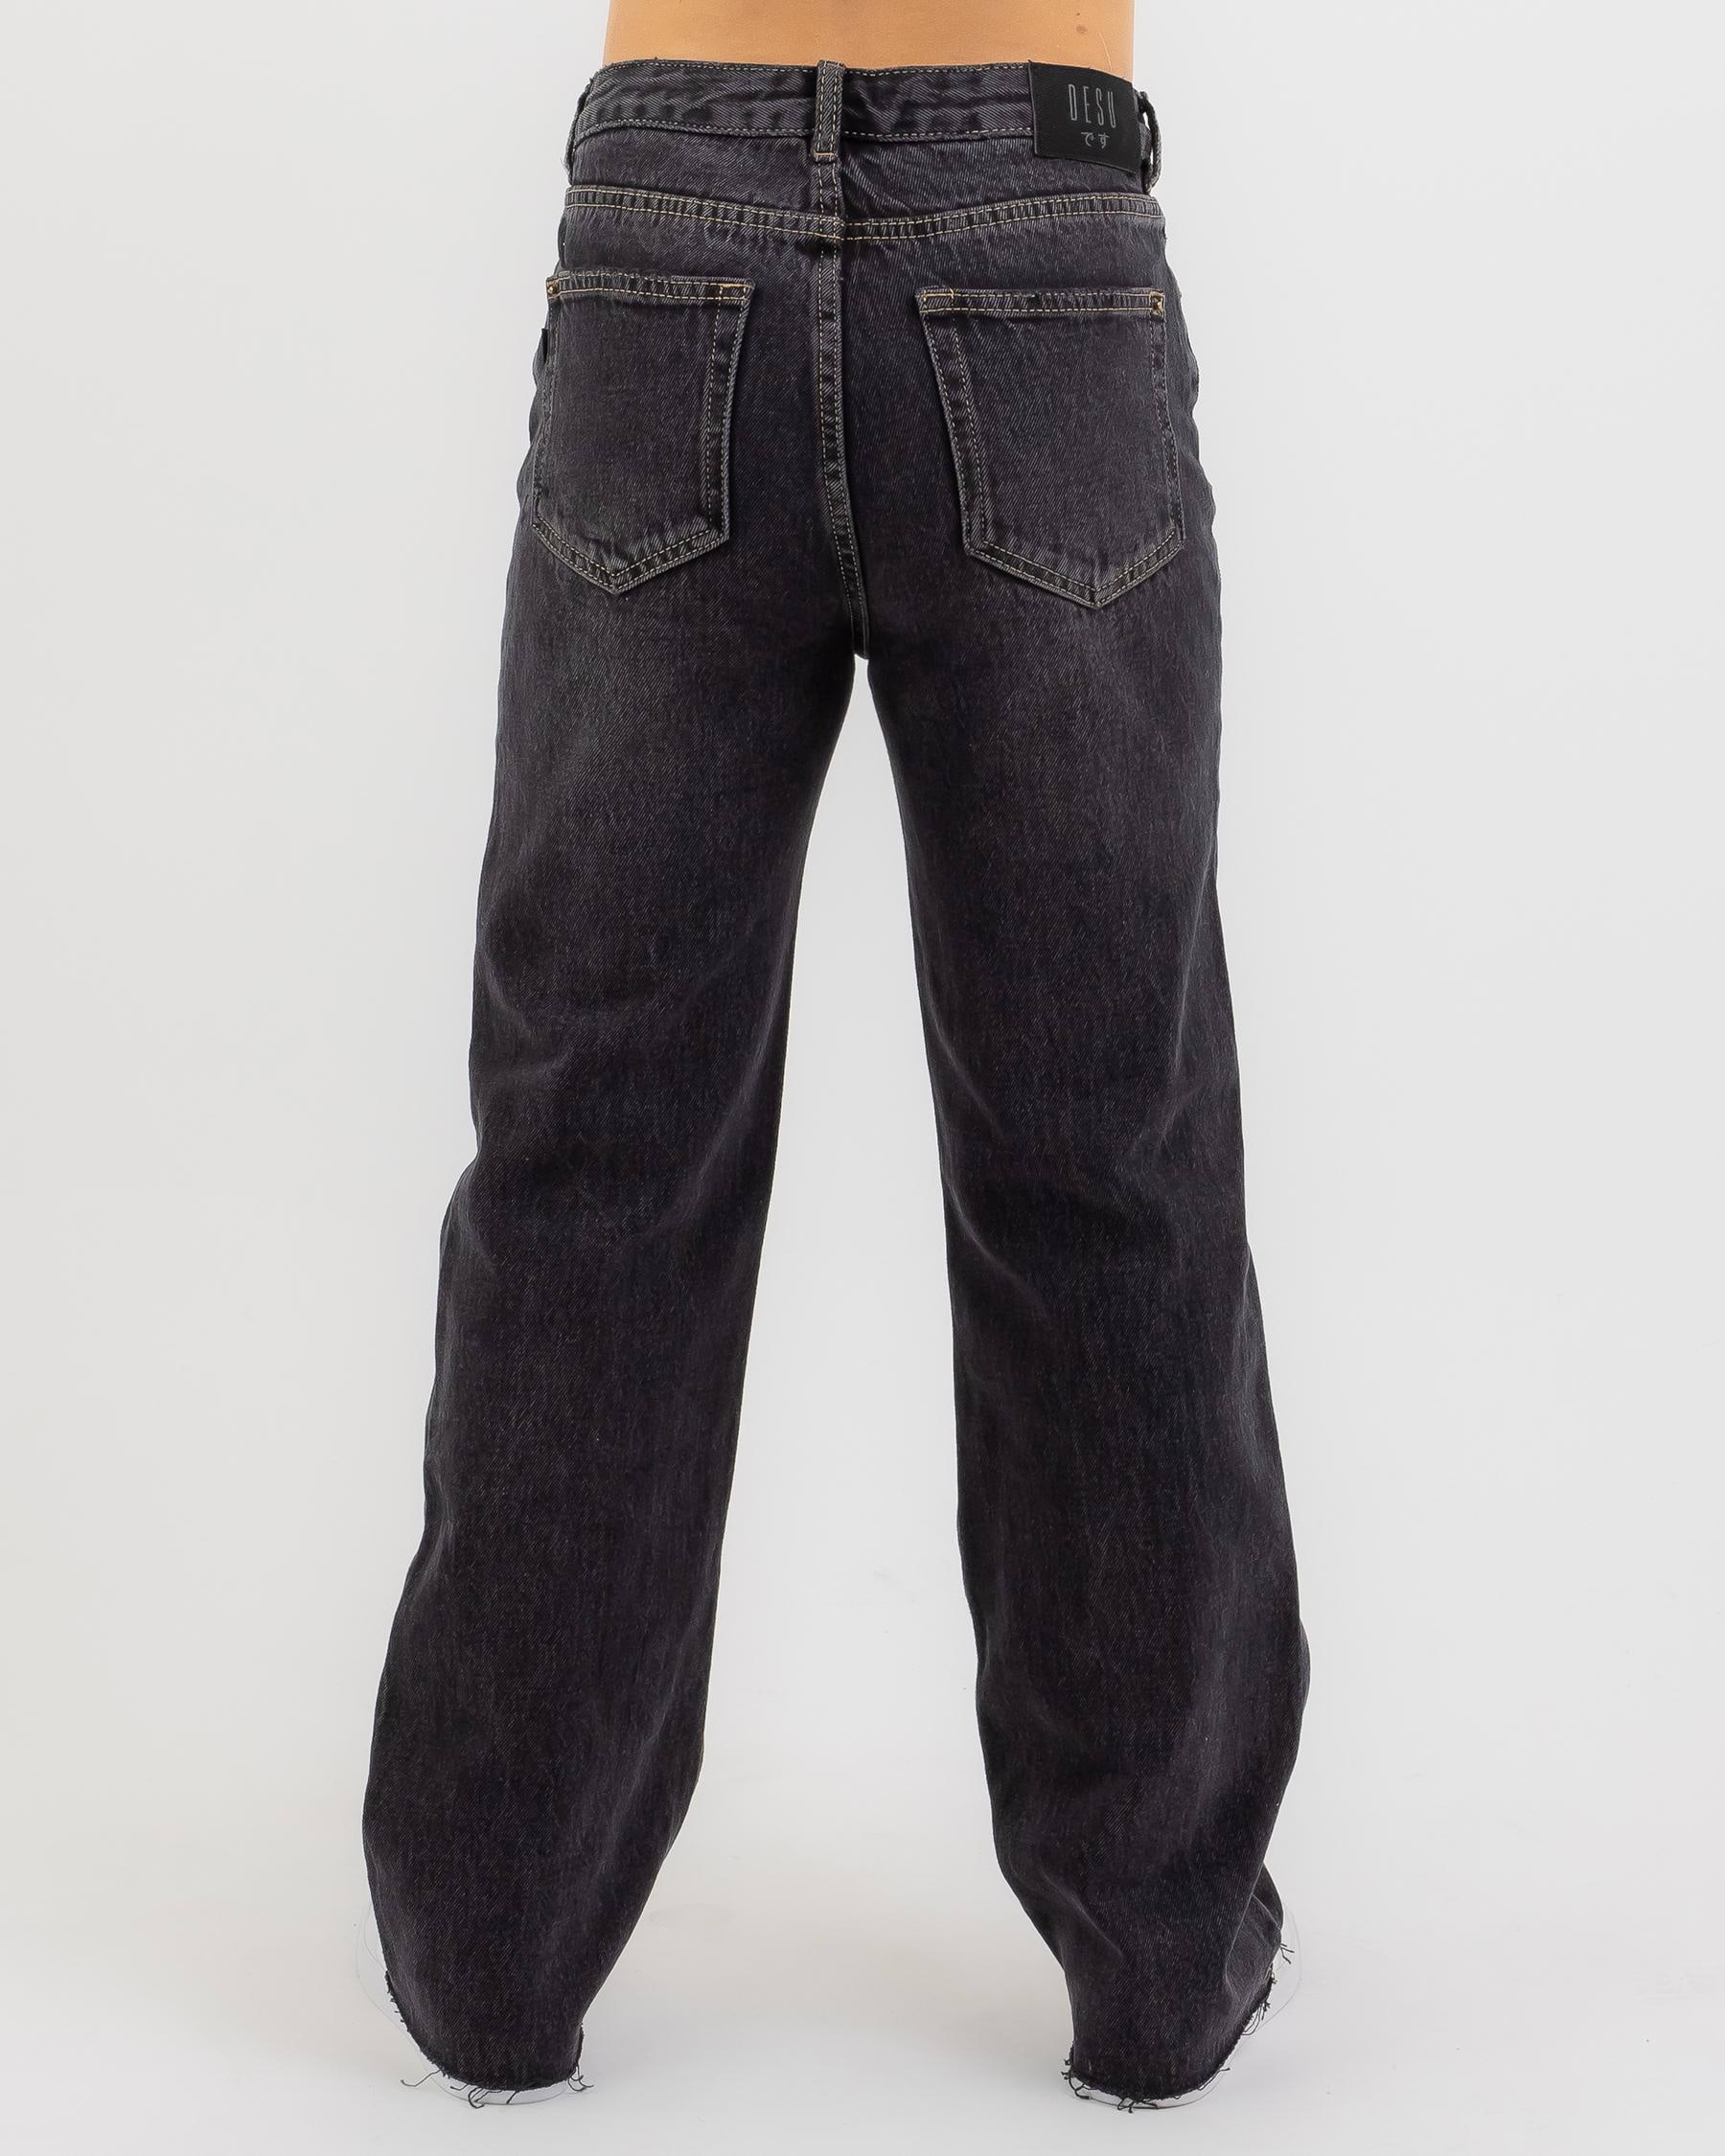 DESU Girls' Jagger Jeans In Washed Black - Fast Shipping & Easy Returns ...